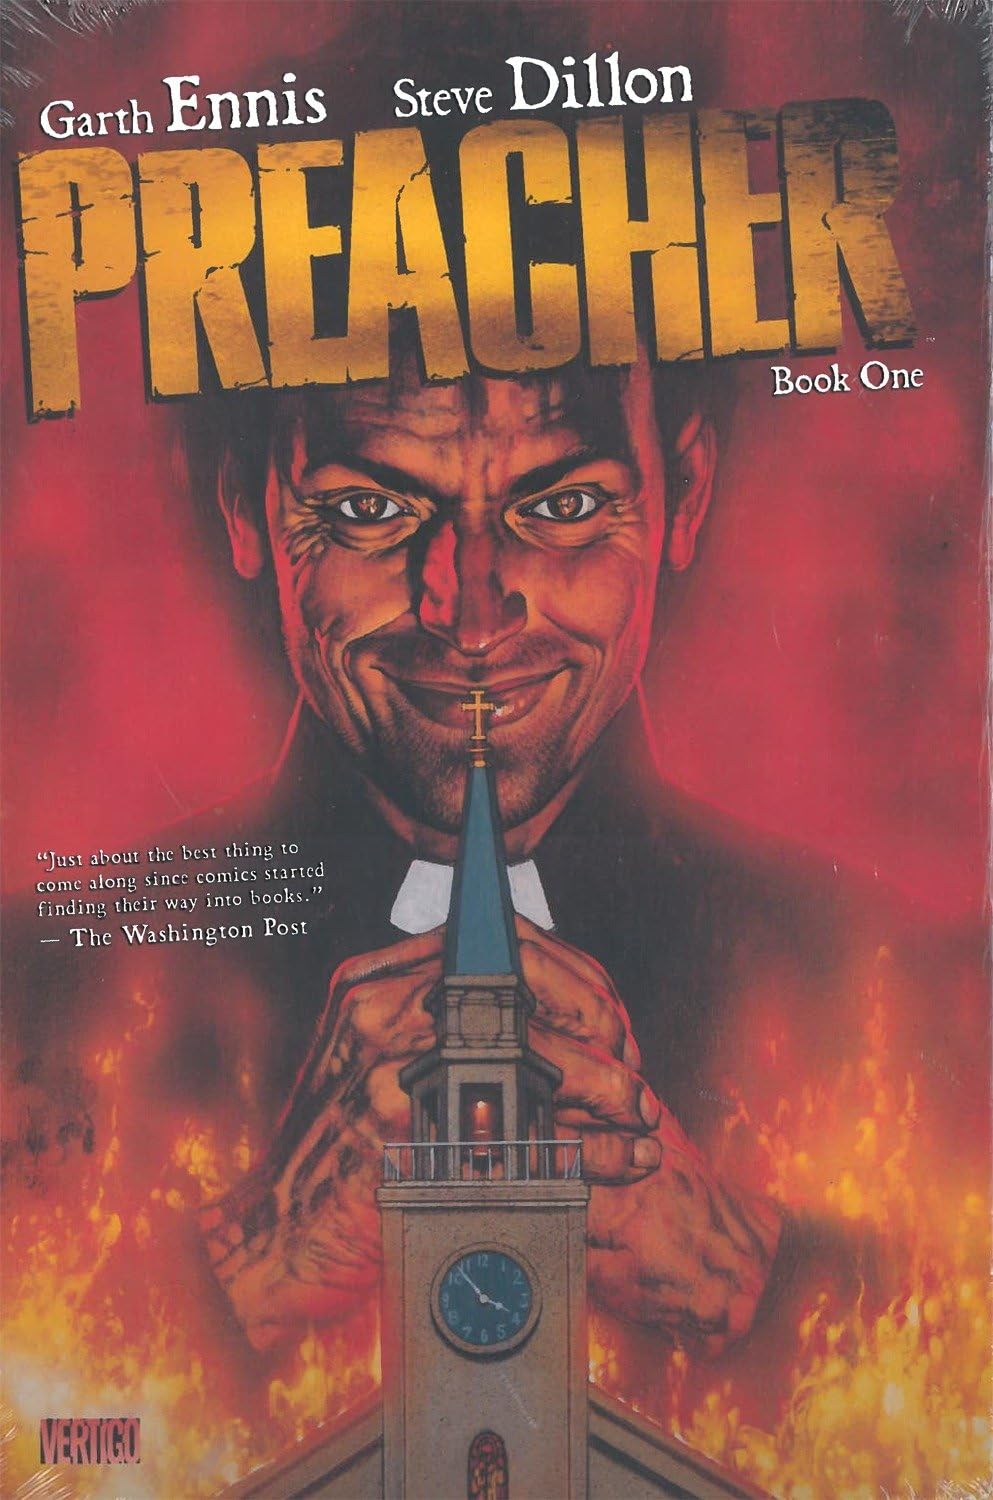 Cover image of Preacher Book One